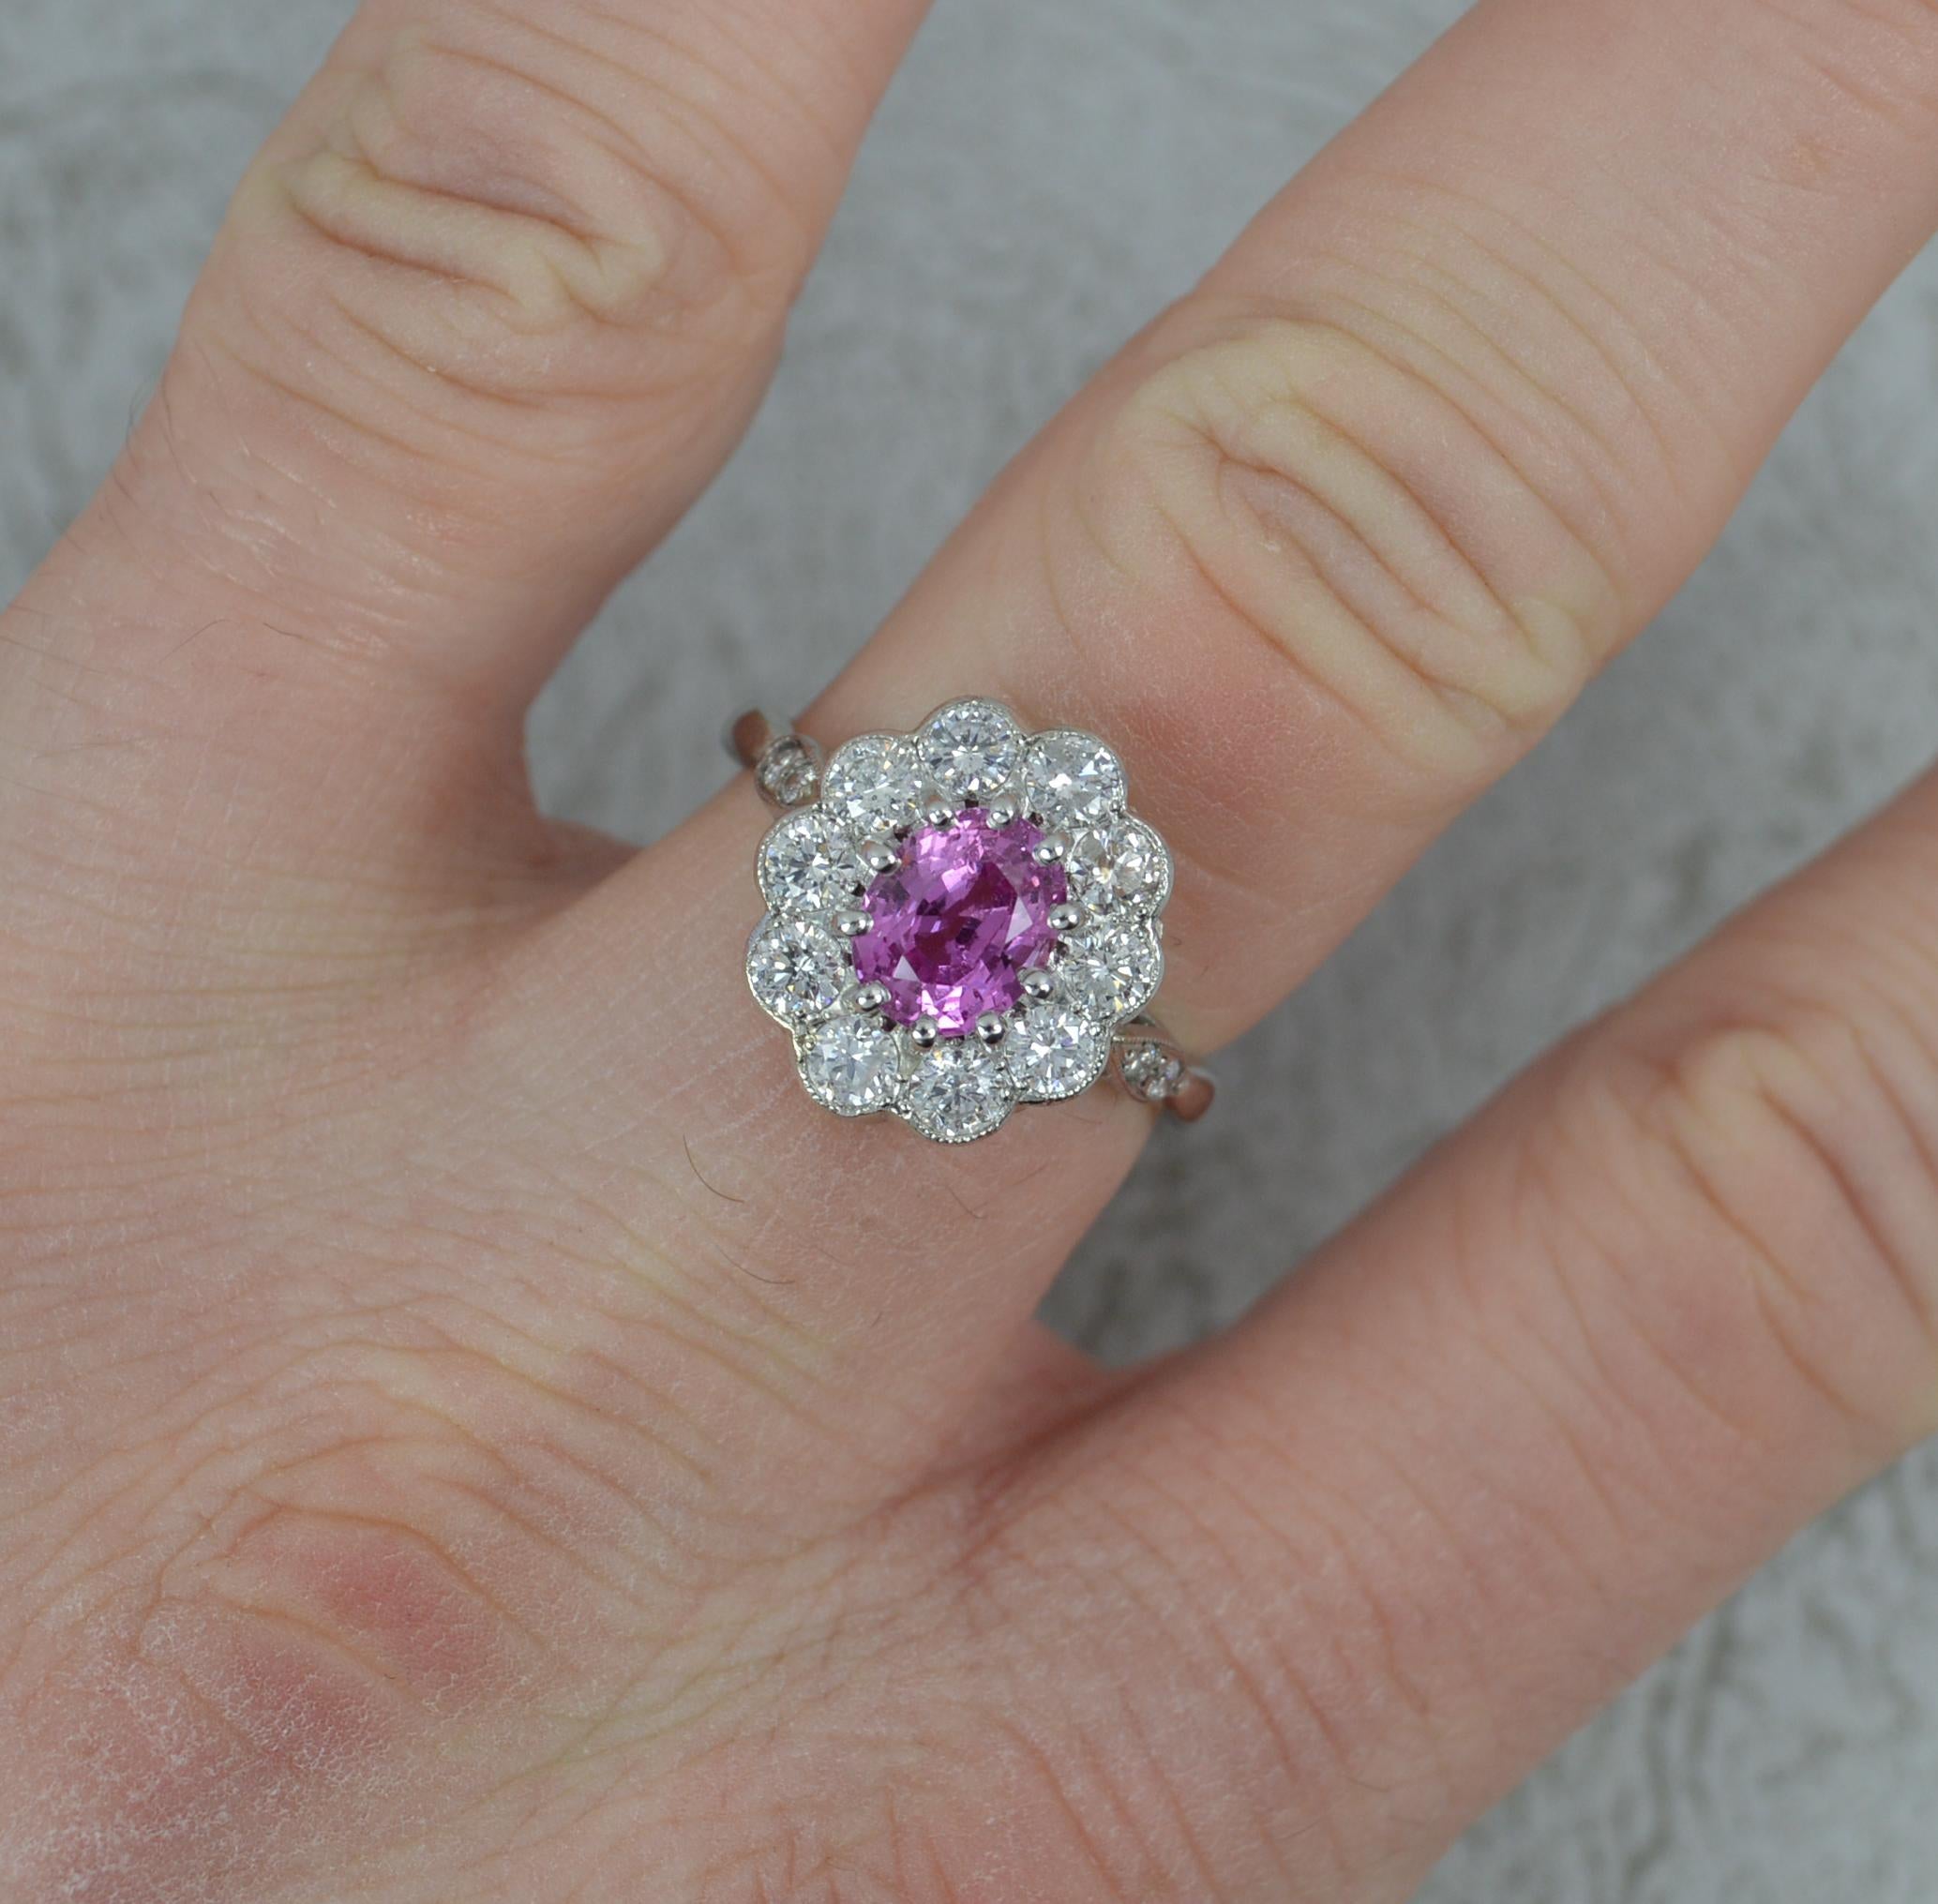 A stunning Pink Sapphire and Diamond cluster ring.
Solid 950 grade platinum example throughout.
Designed with an oval cut vivid pink sapphire to centre, full bezel setting. 1.45 carats. Surrounding are many ten round brilliant cut diamonds with